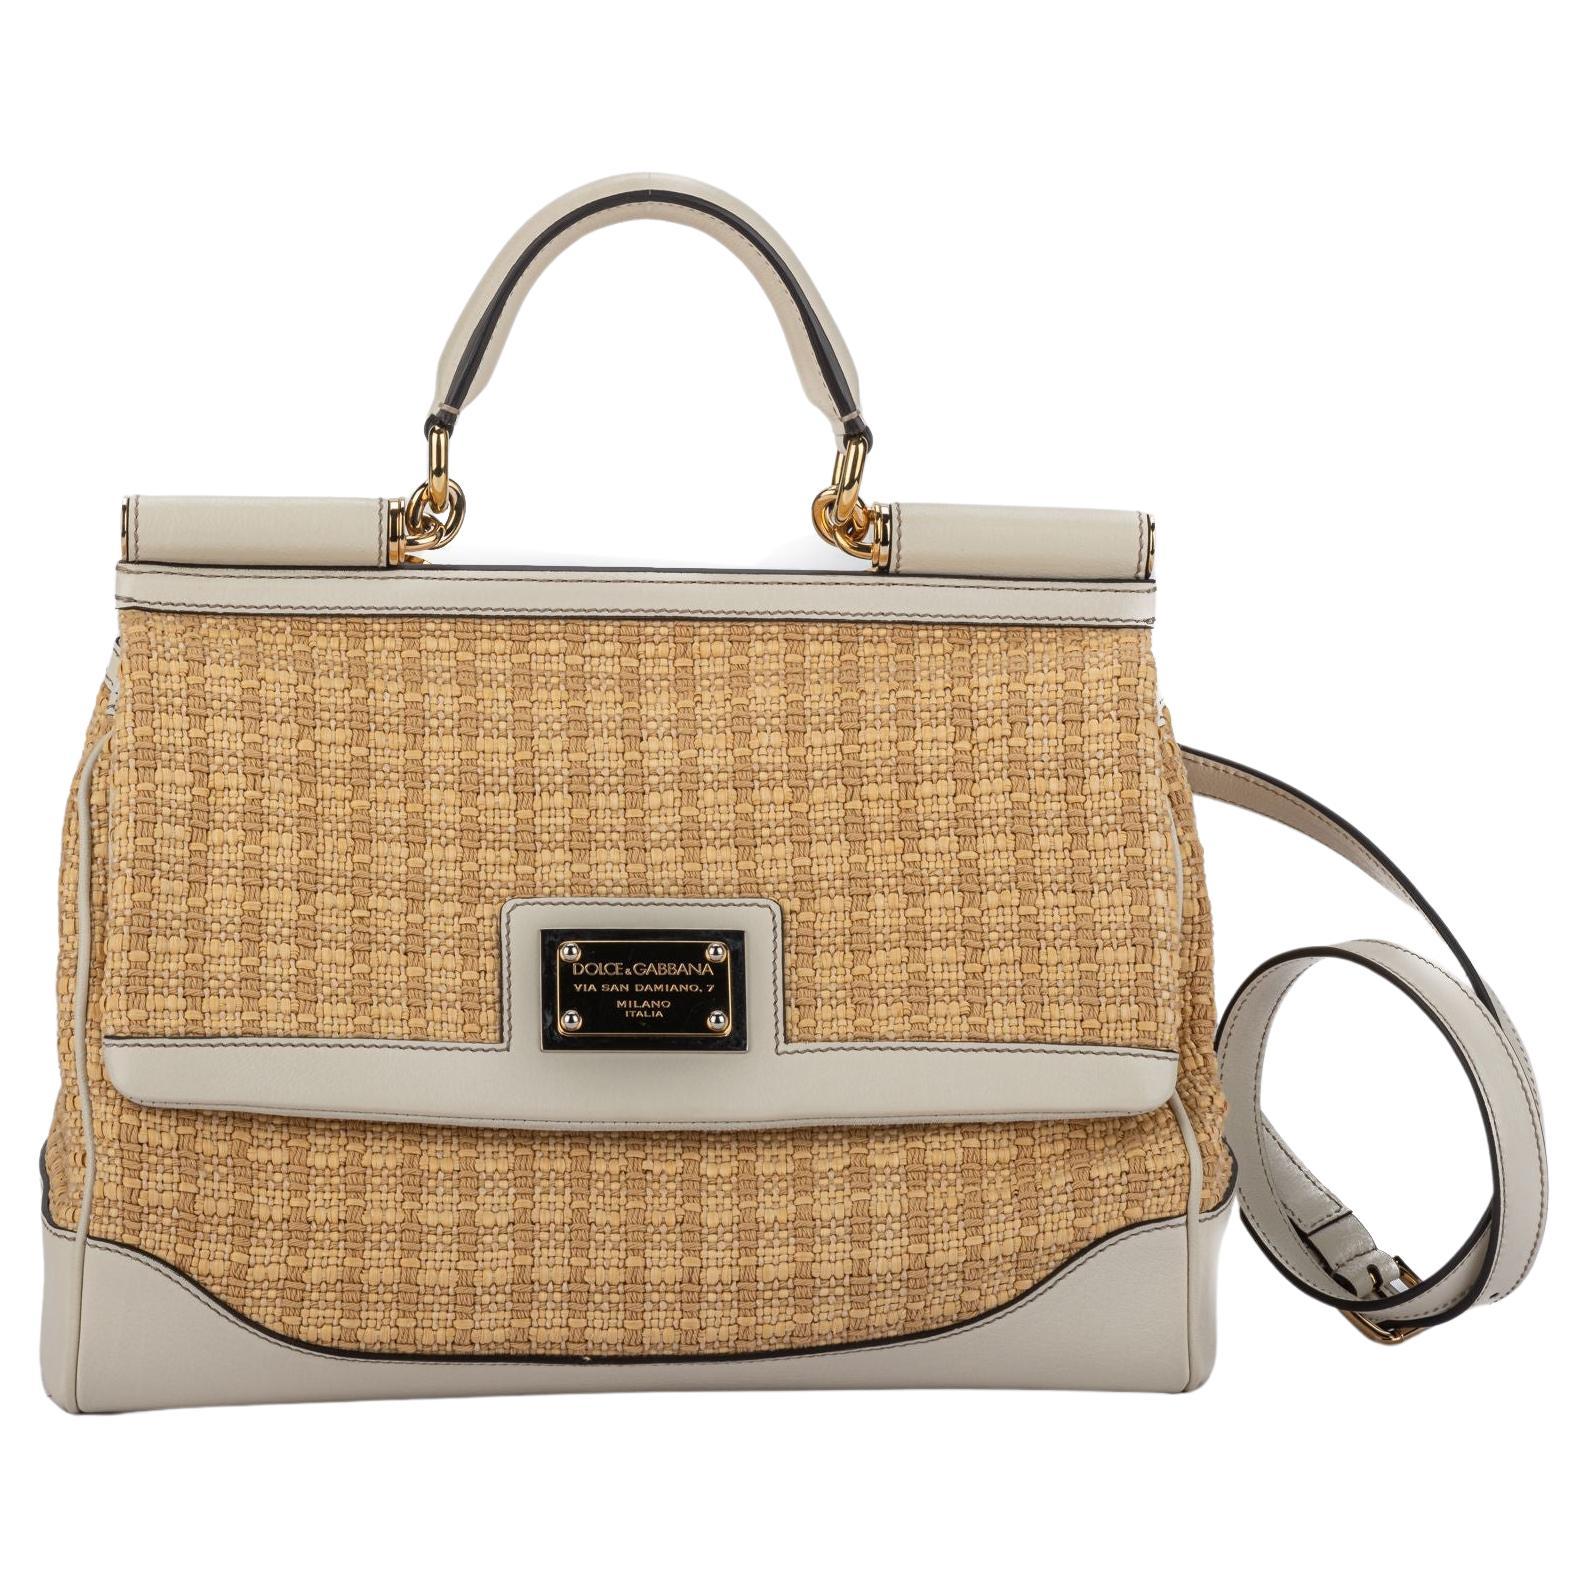 Dolce Gabbana New Large Straw Cream Bag For Sale